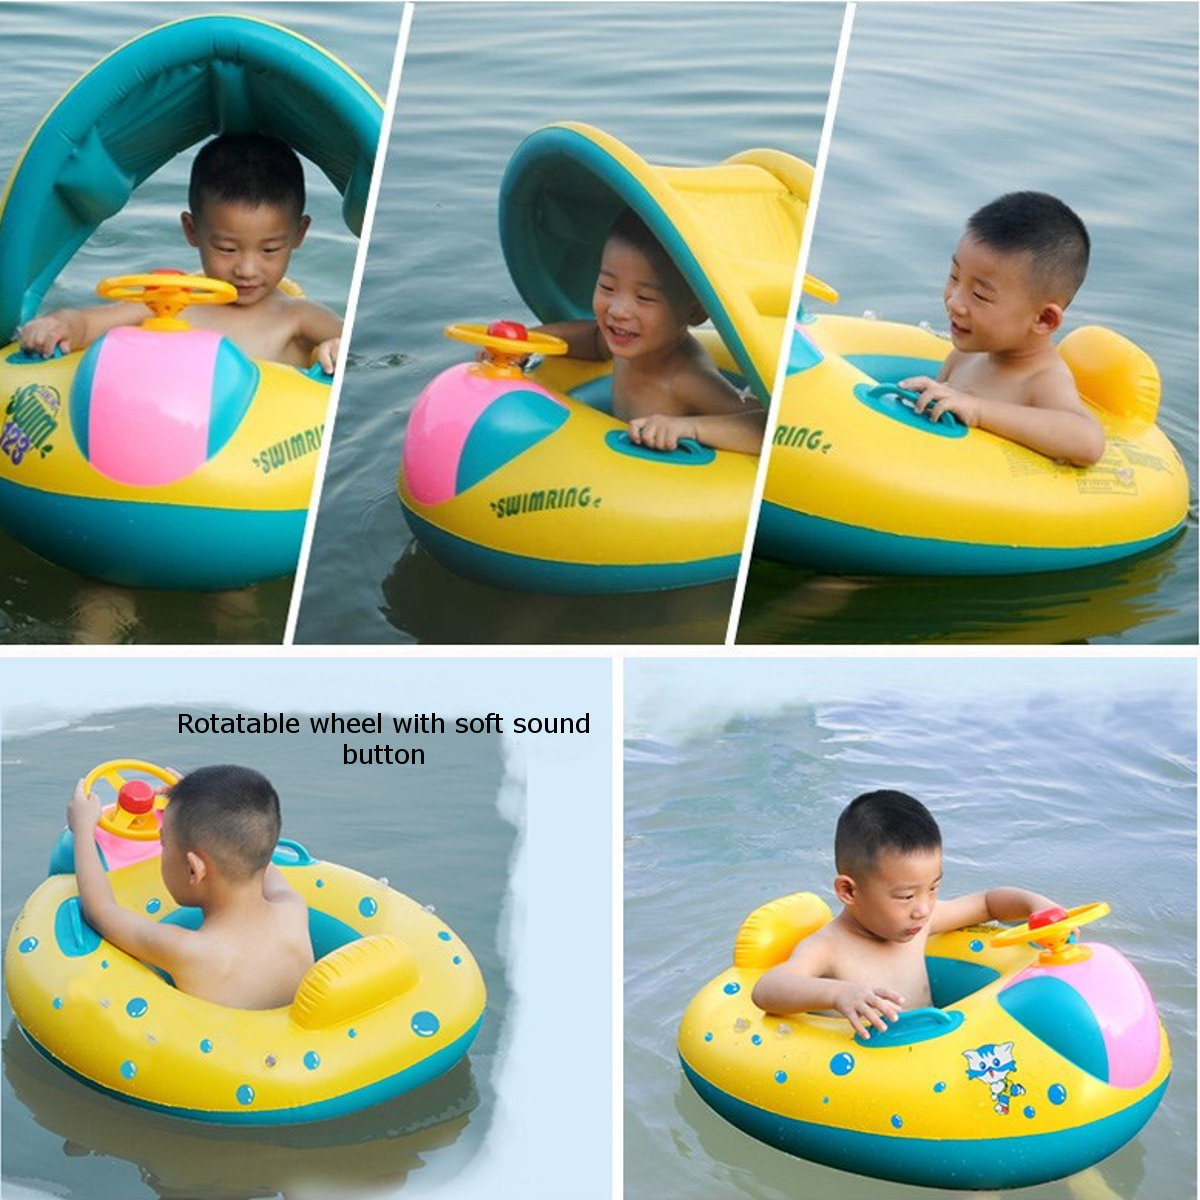 Baby-Inflatable-Swimming-Float-Ring-PVC-Lying-Water-Seat-Boat-Sunshade-Pool-Mattress-with-Canopy-Kid-1869041-8